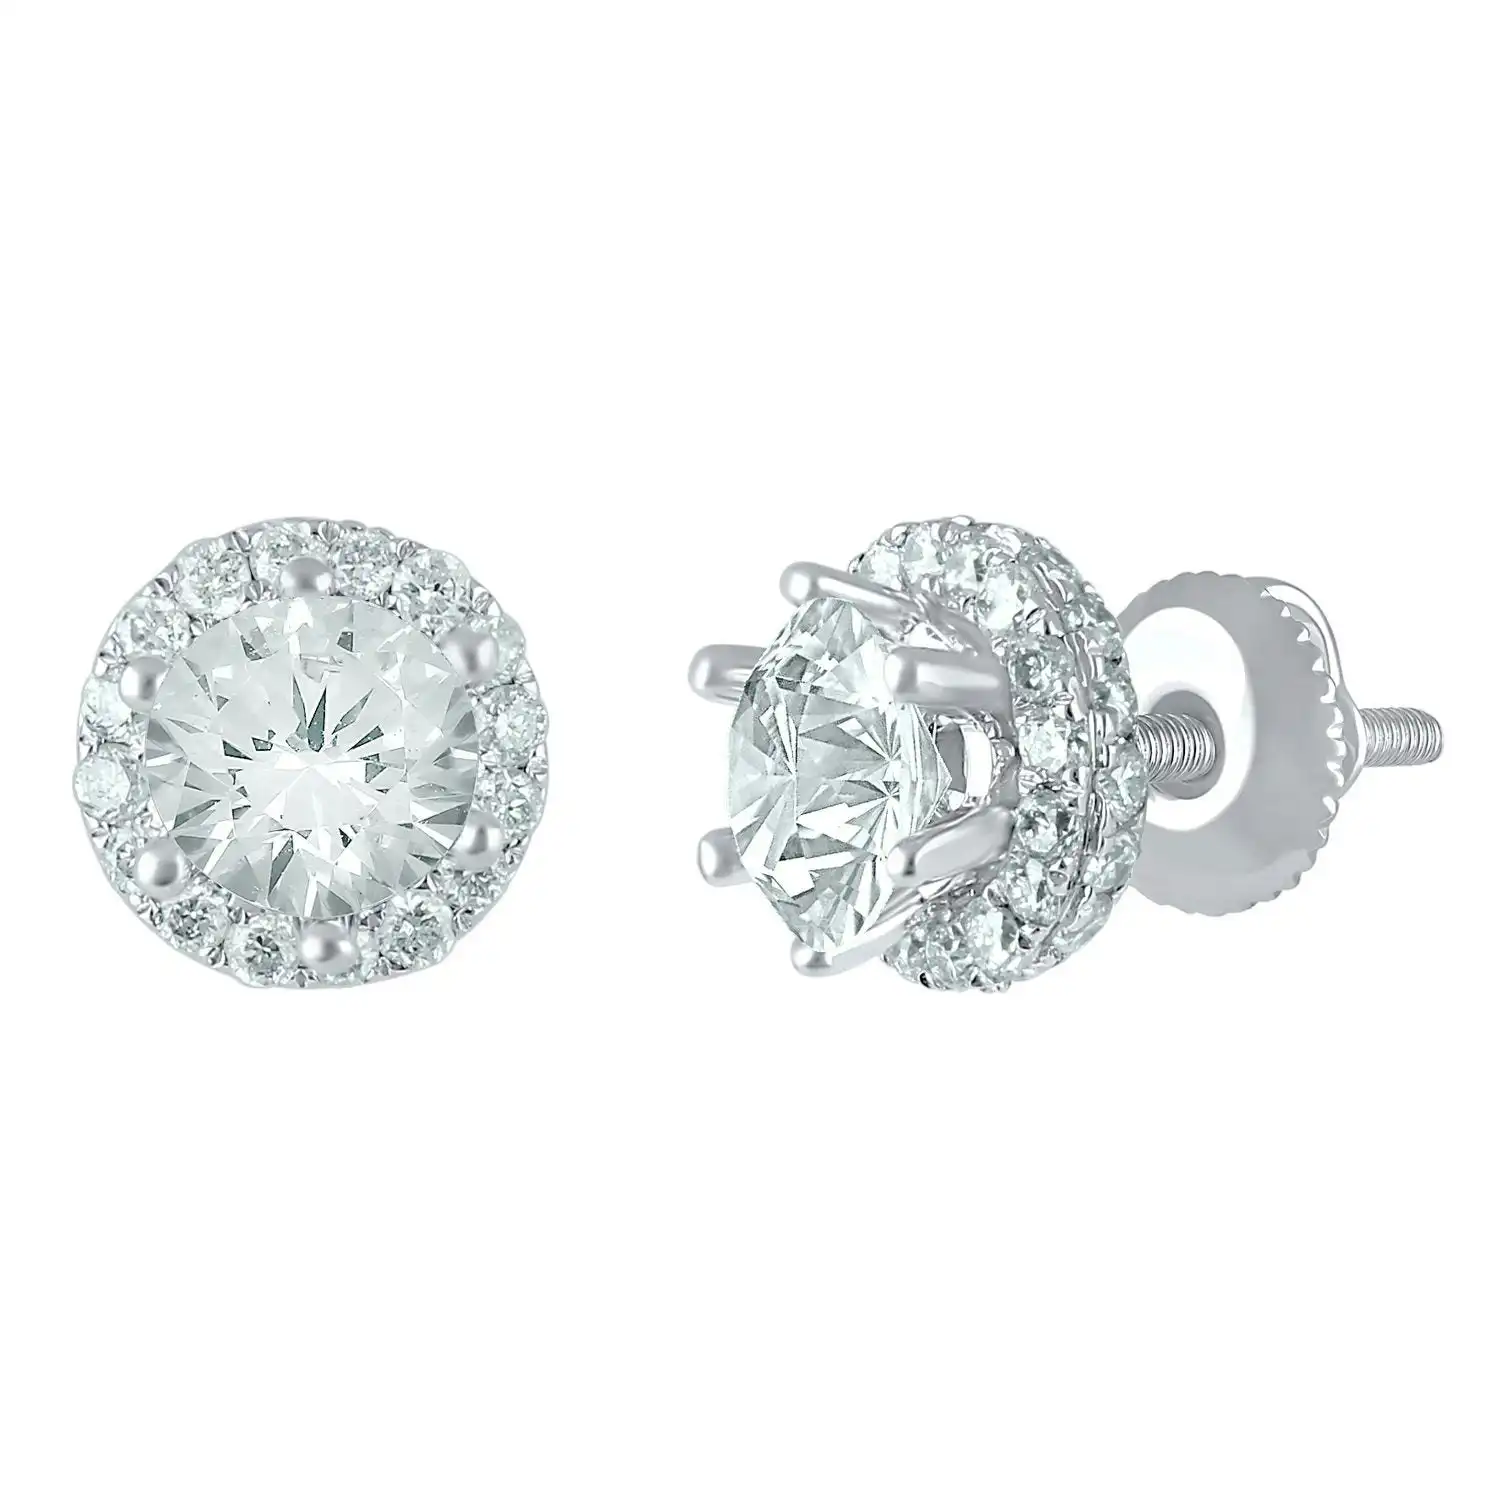 Love by Michelle Beville Halo Solitaire Earrings with 0.65ct of Diamonds in 18ct White Gold